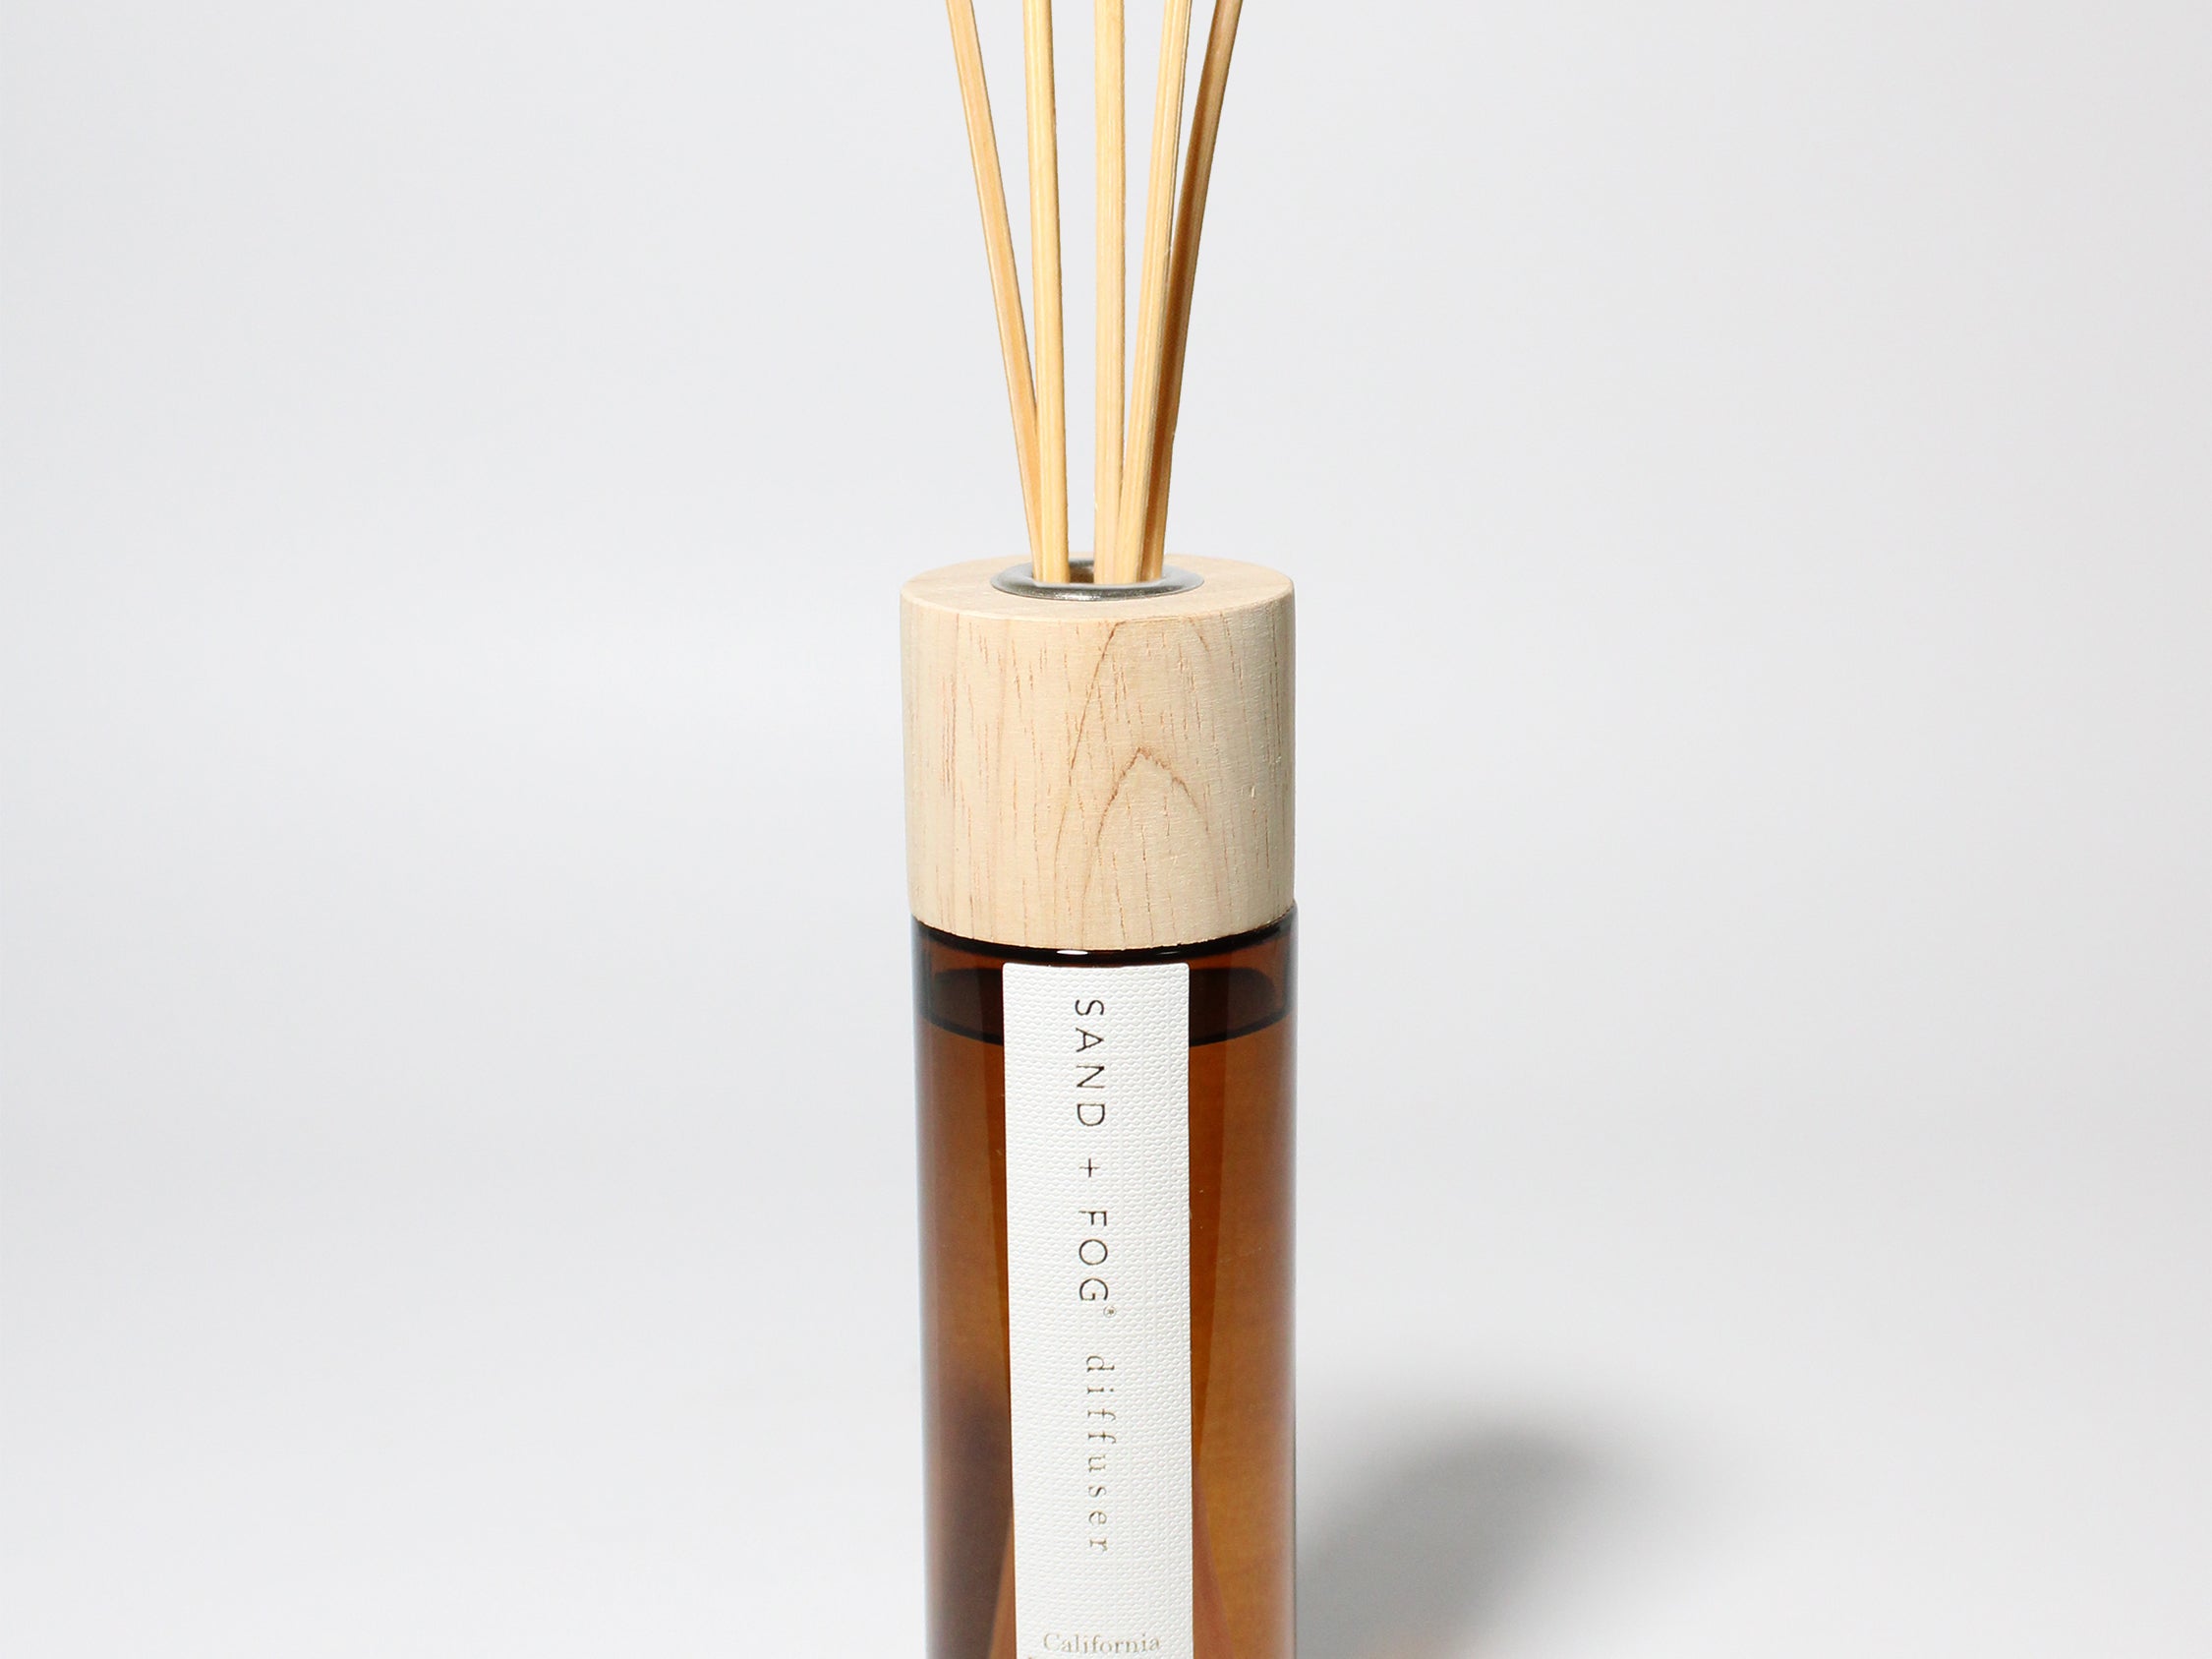 California Beach House reed diffuser Black Glass with Wood Top